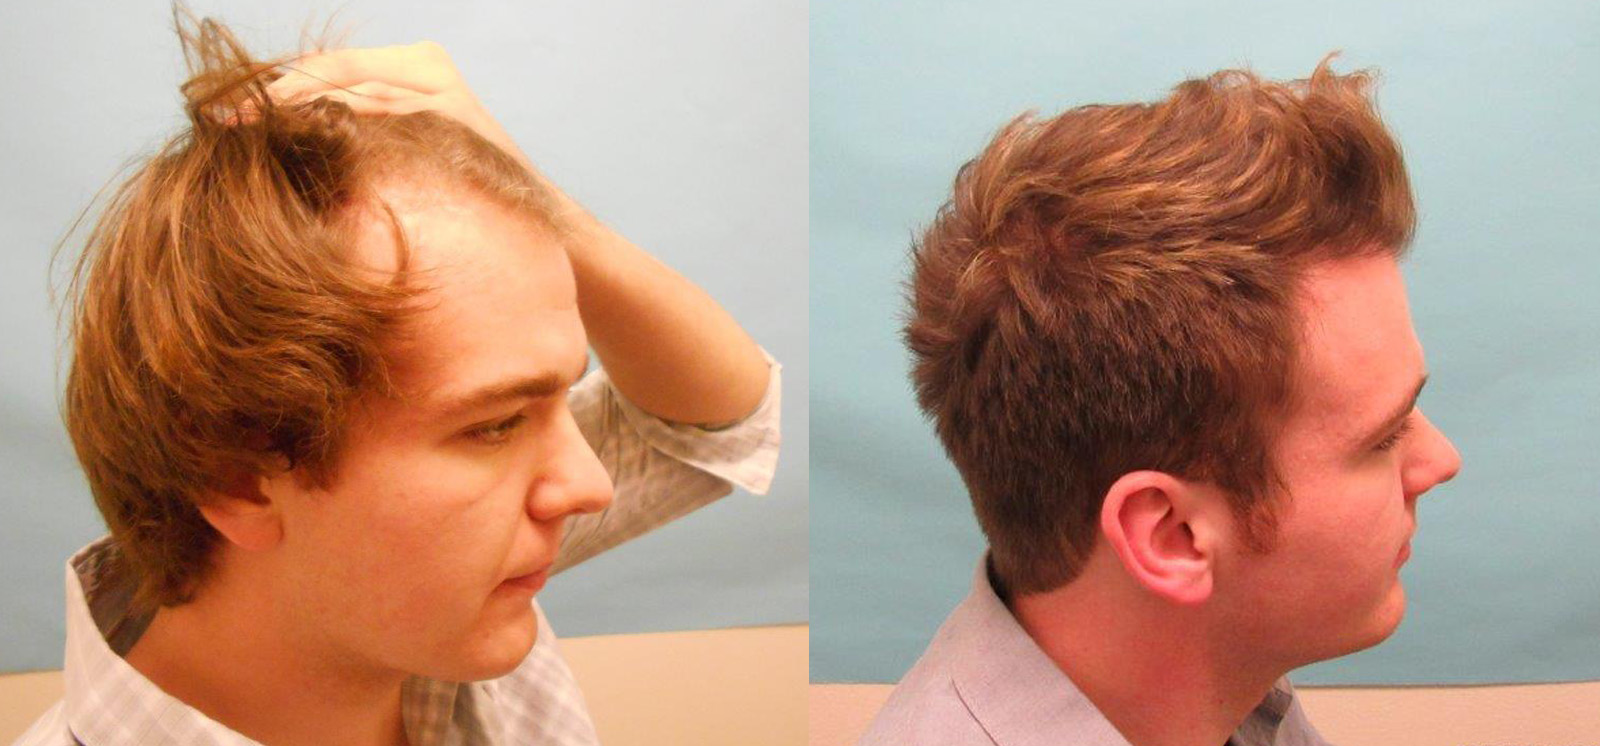 Video - Approach for Young Men Experiencing Hair Loss - Hair Transplant  Case Study - McGrath Medical